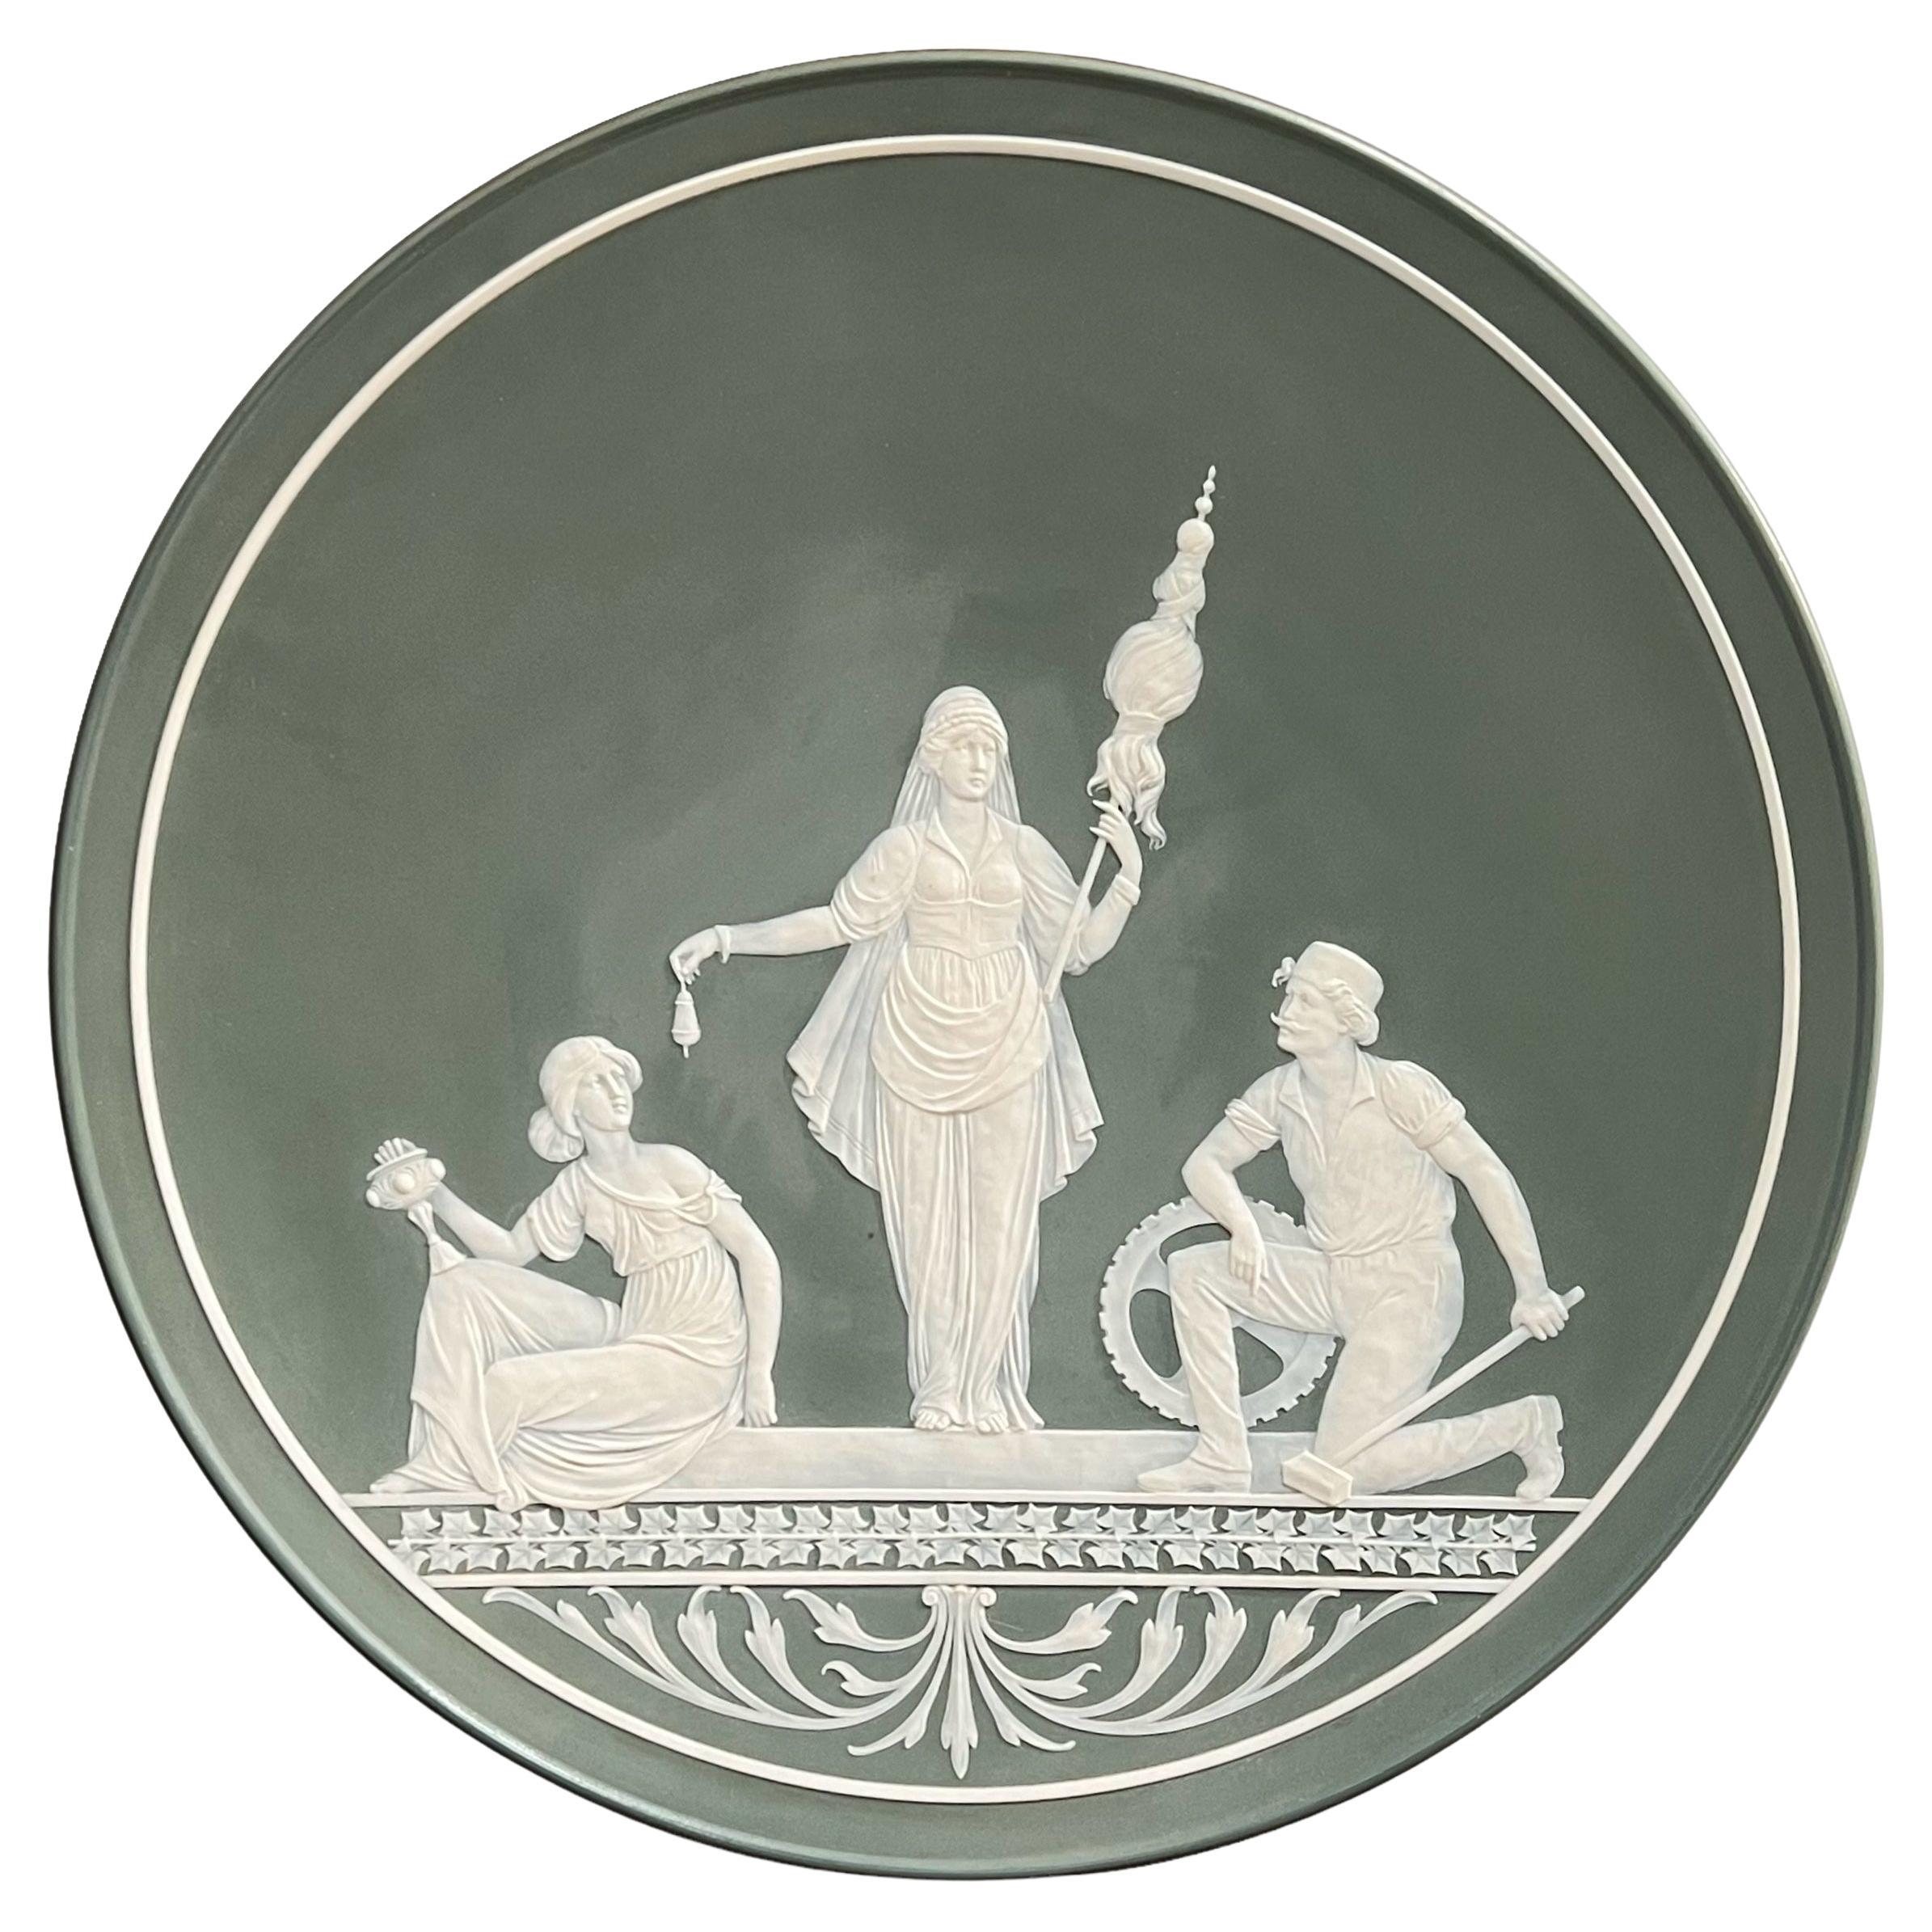 Villeroy & Boch Mettlach charger in Phanolith porcelain (similar to Jasperware) depicting a Greco-Roman goddess and attendants in white porcelain on a forest green ground.  In very good condition.